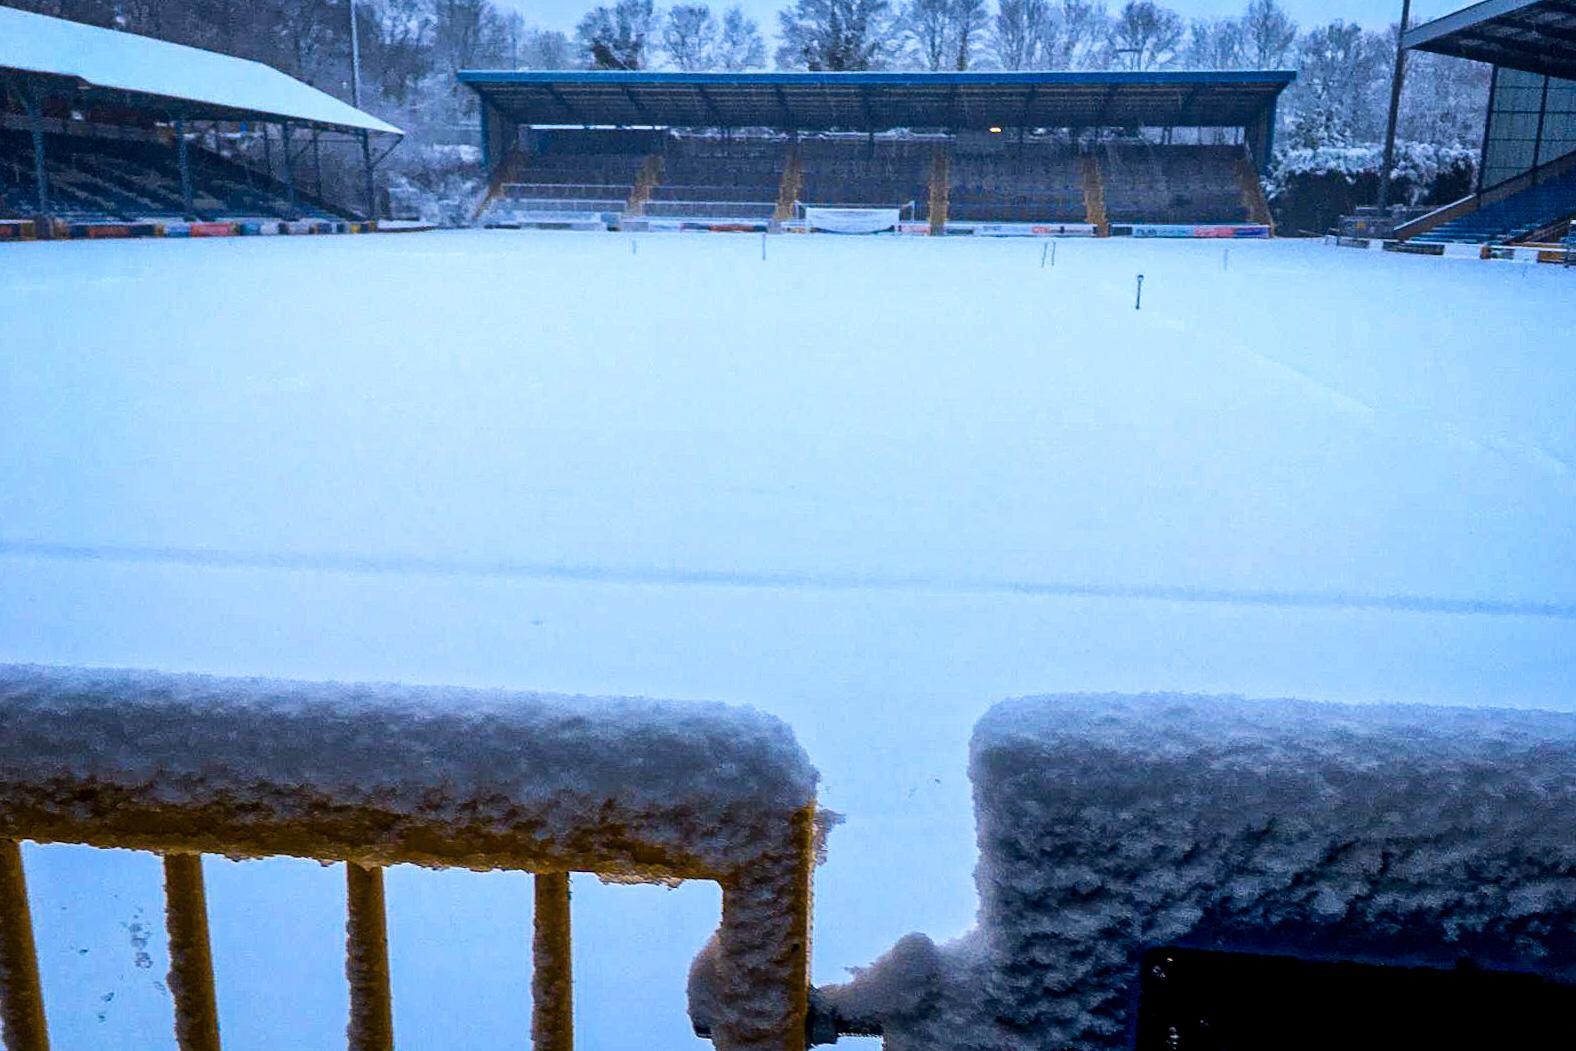 FC Halifax Town: Hartlepool game called off